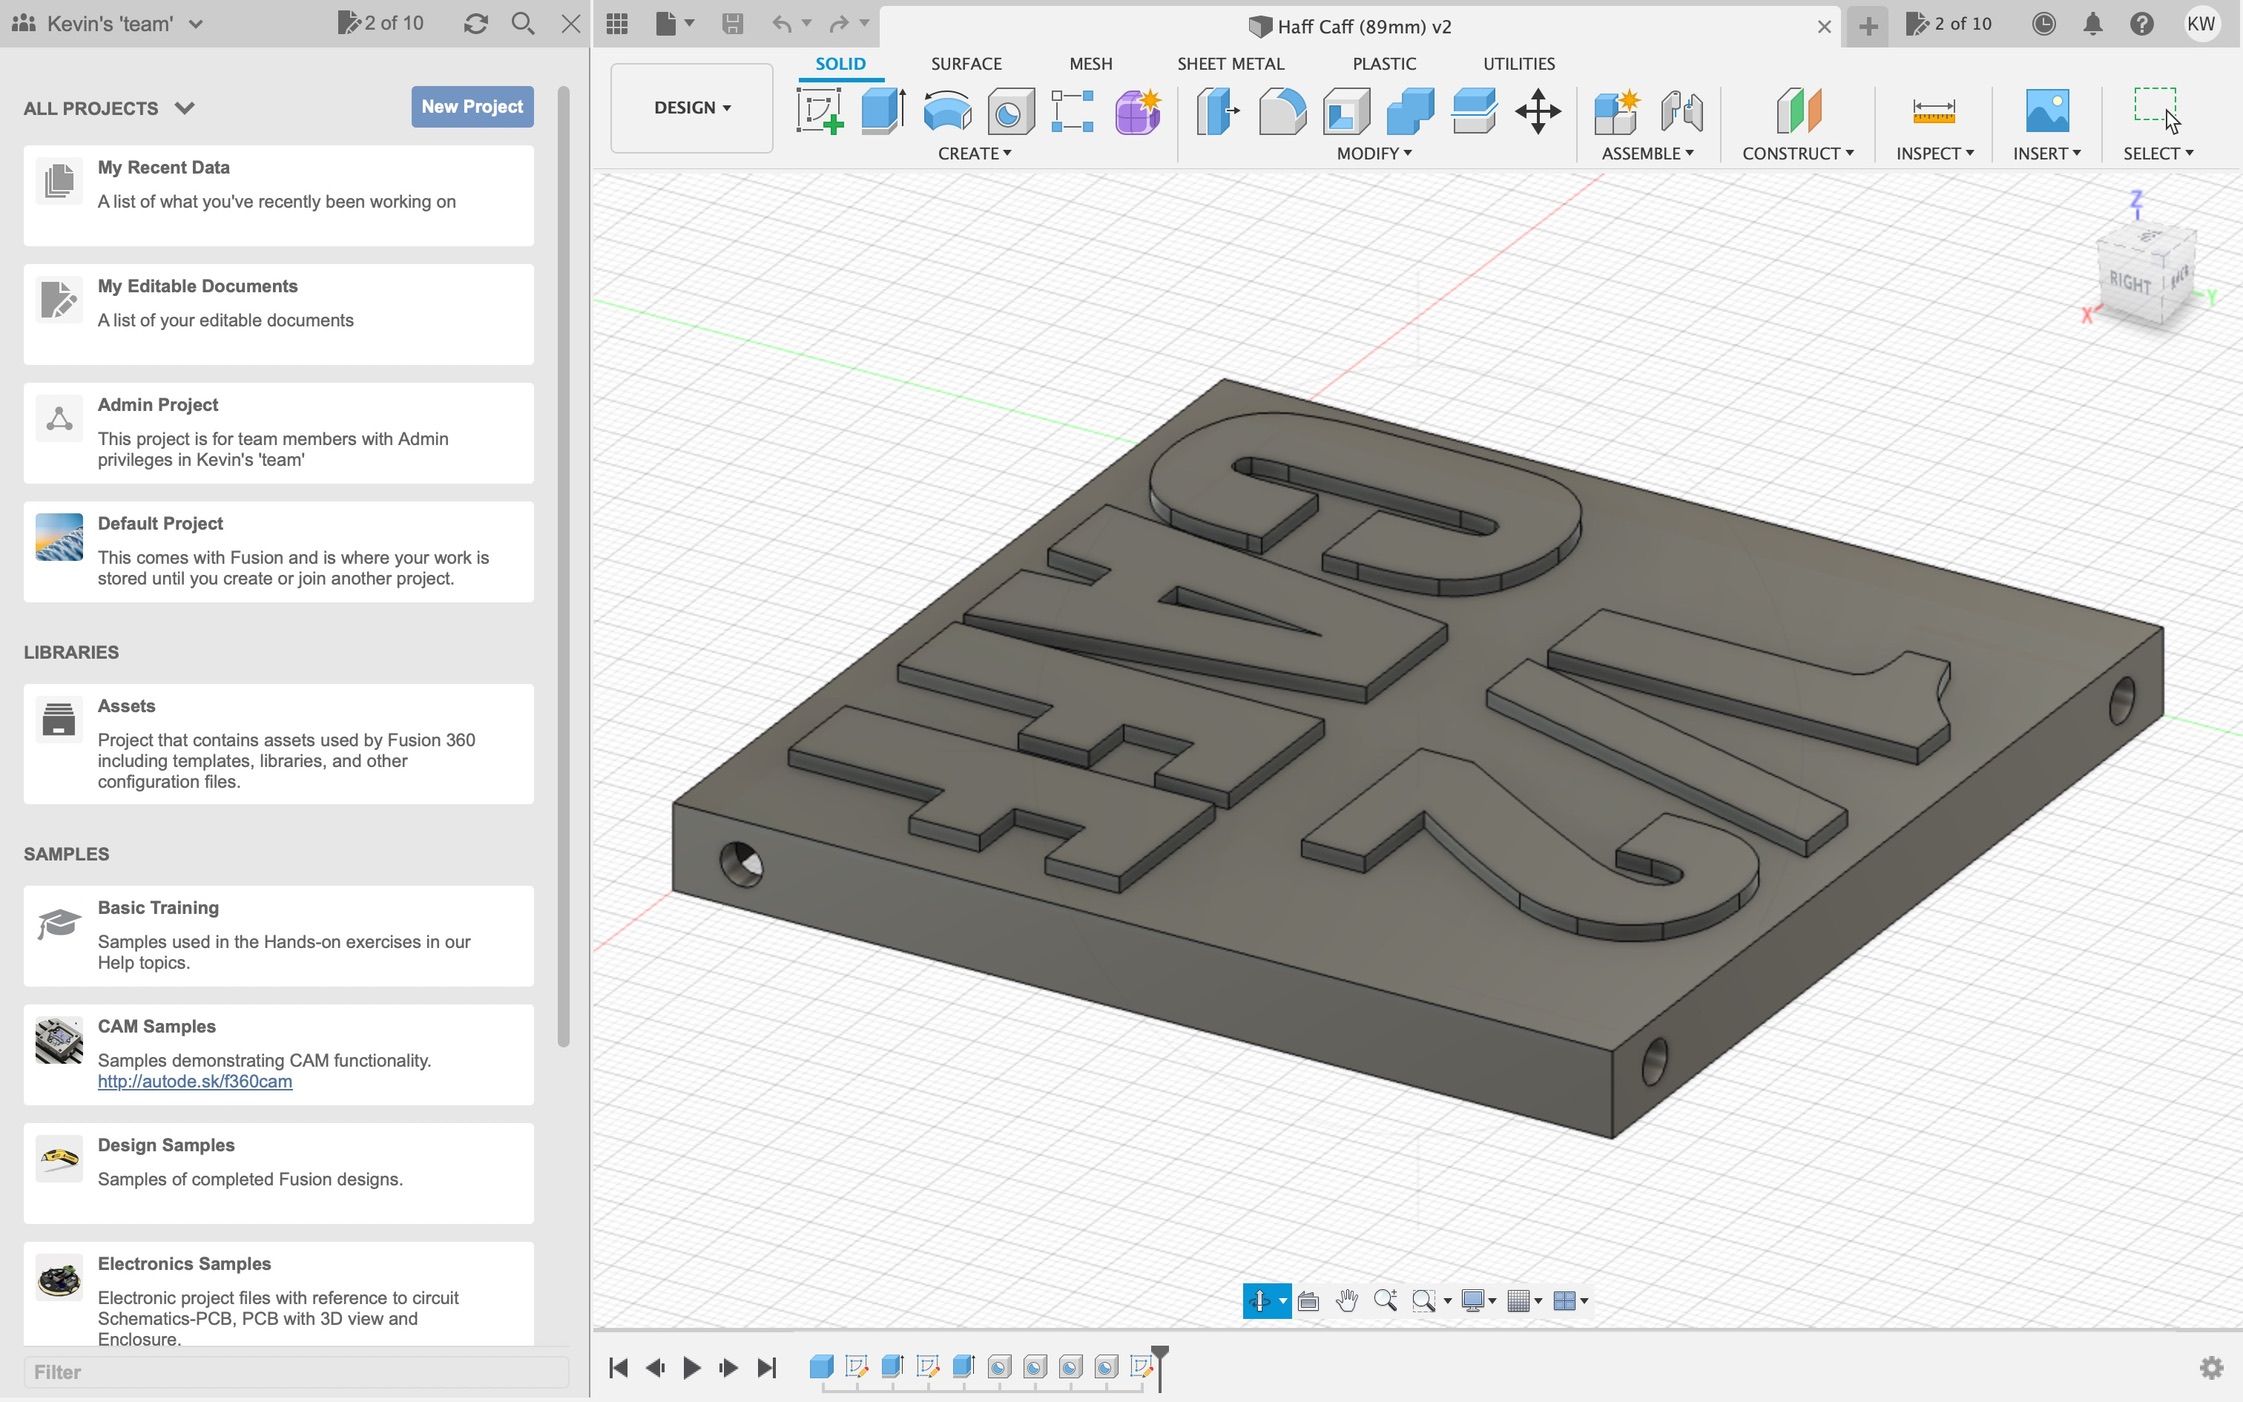 The final model in Fusion 360